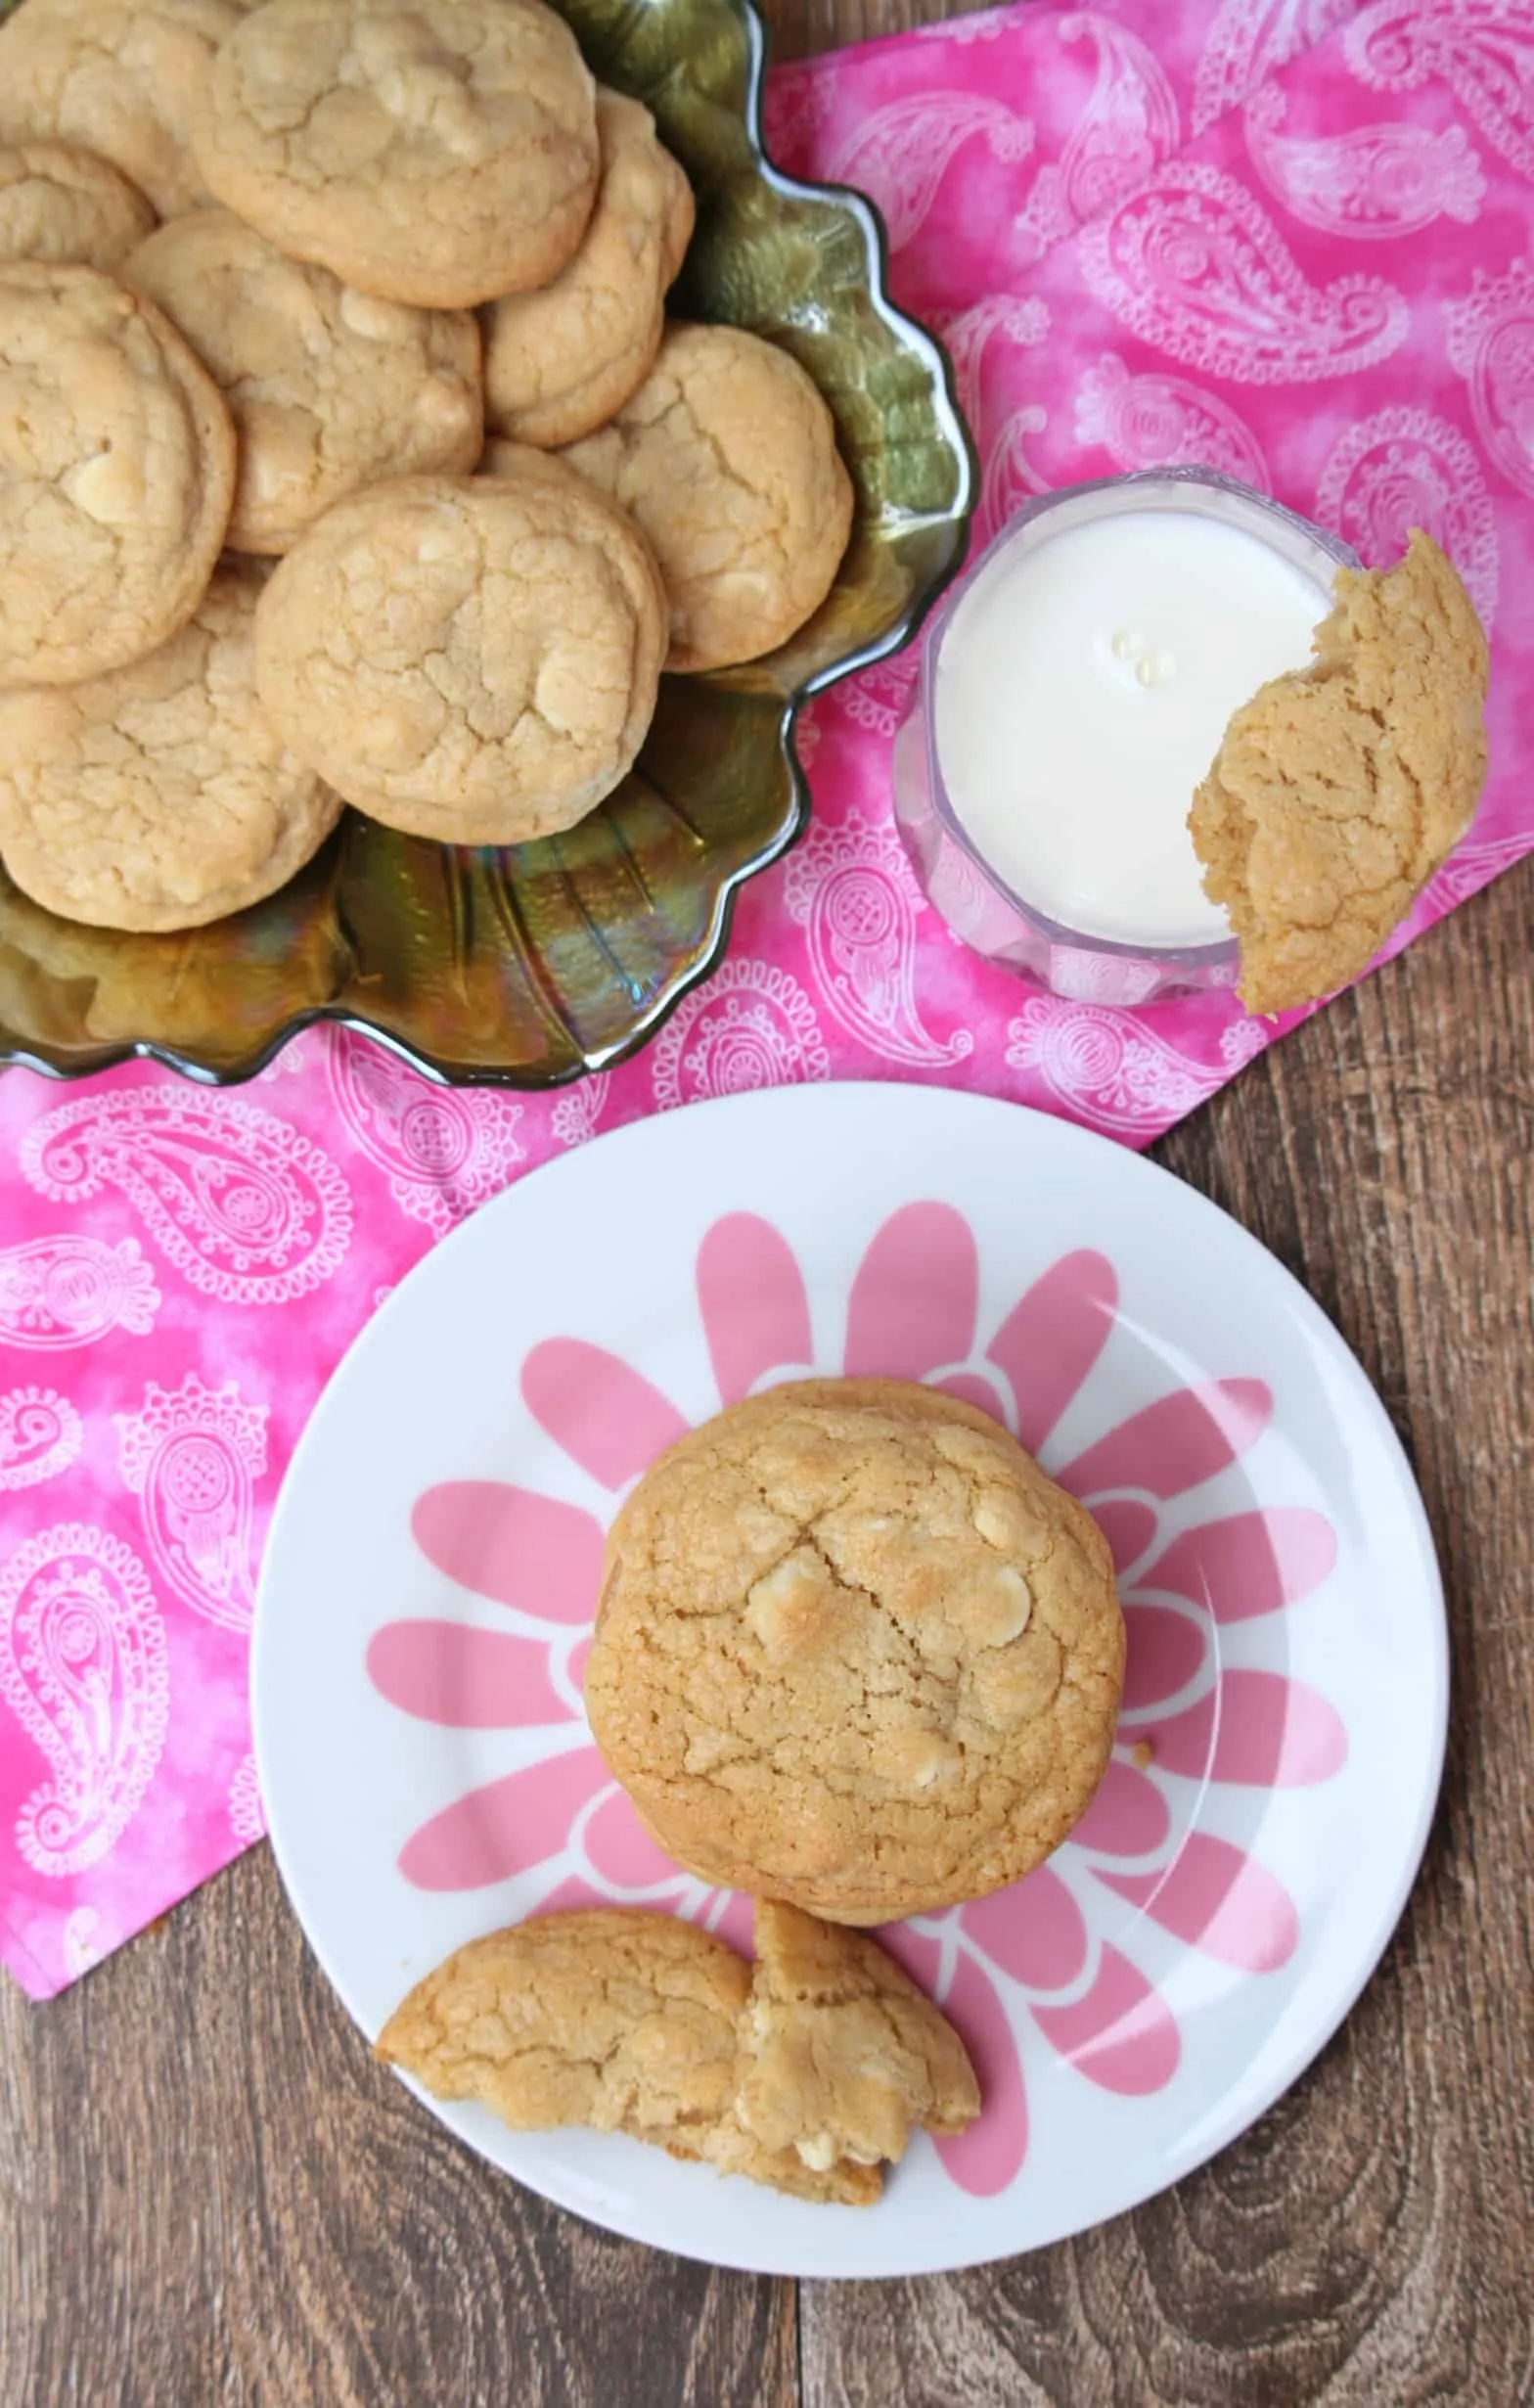 White Chocolate Macadamia Nut Cookies goes well with milk.